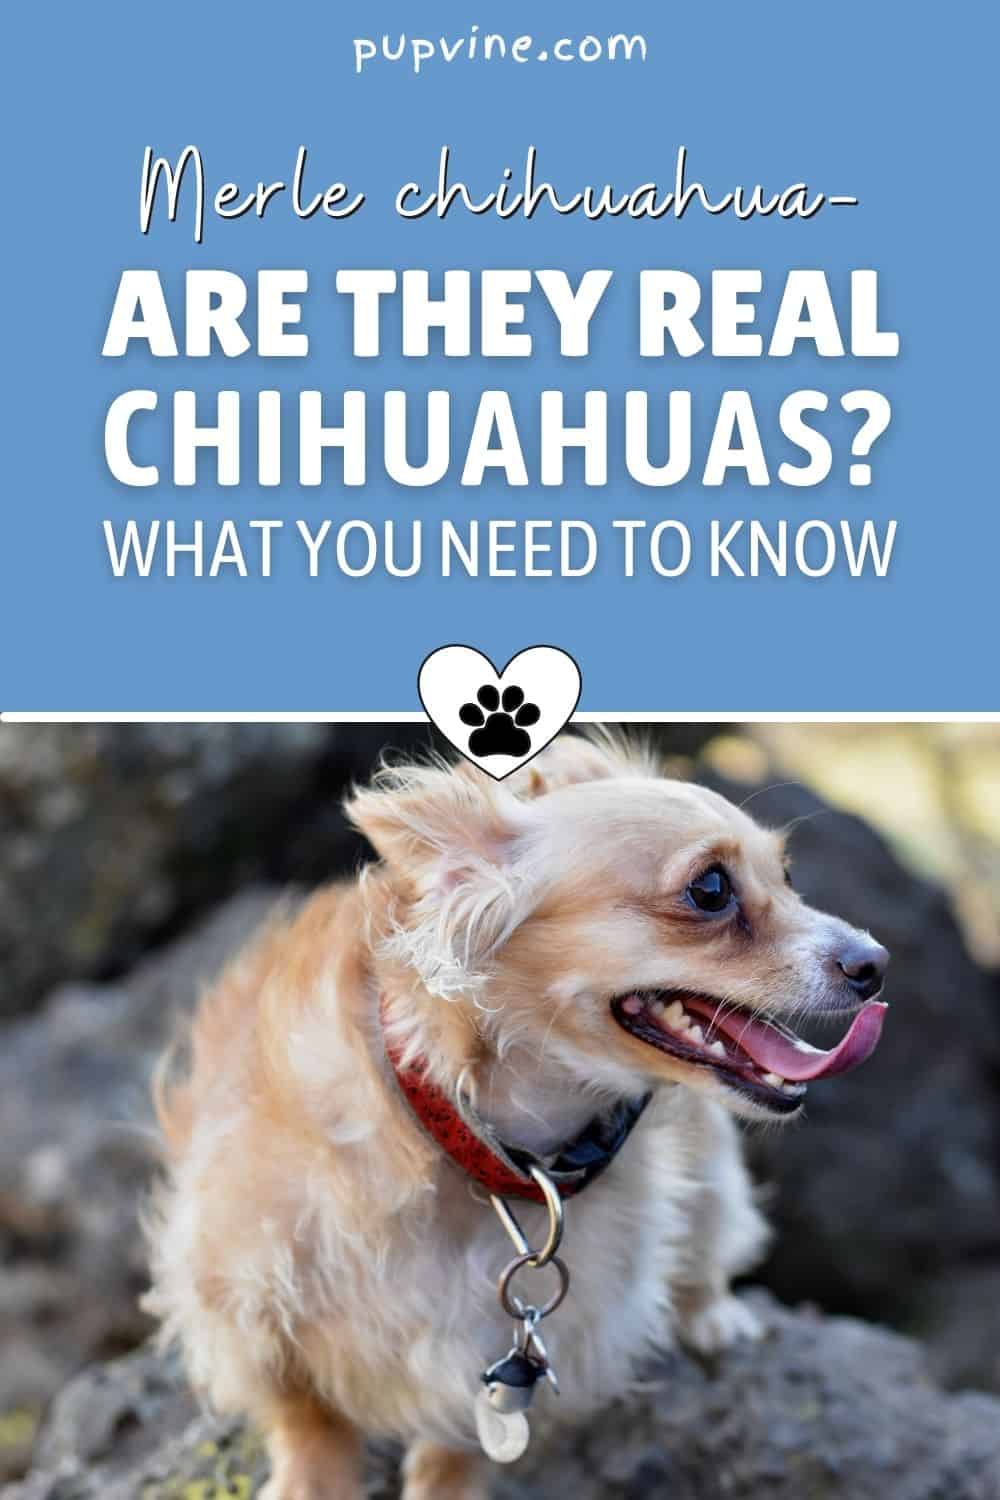 Merle Chihuahua – Are They Real Chihuahuas? What You Need To Know